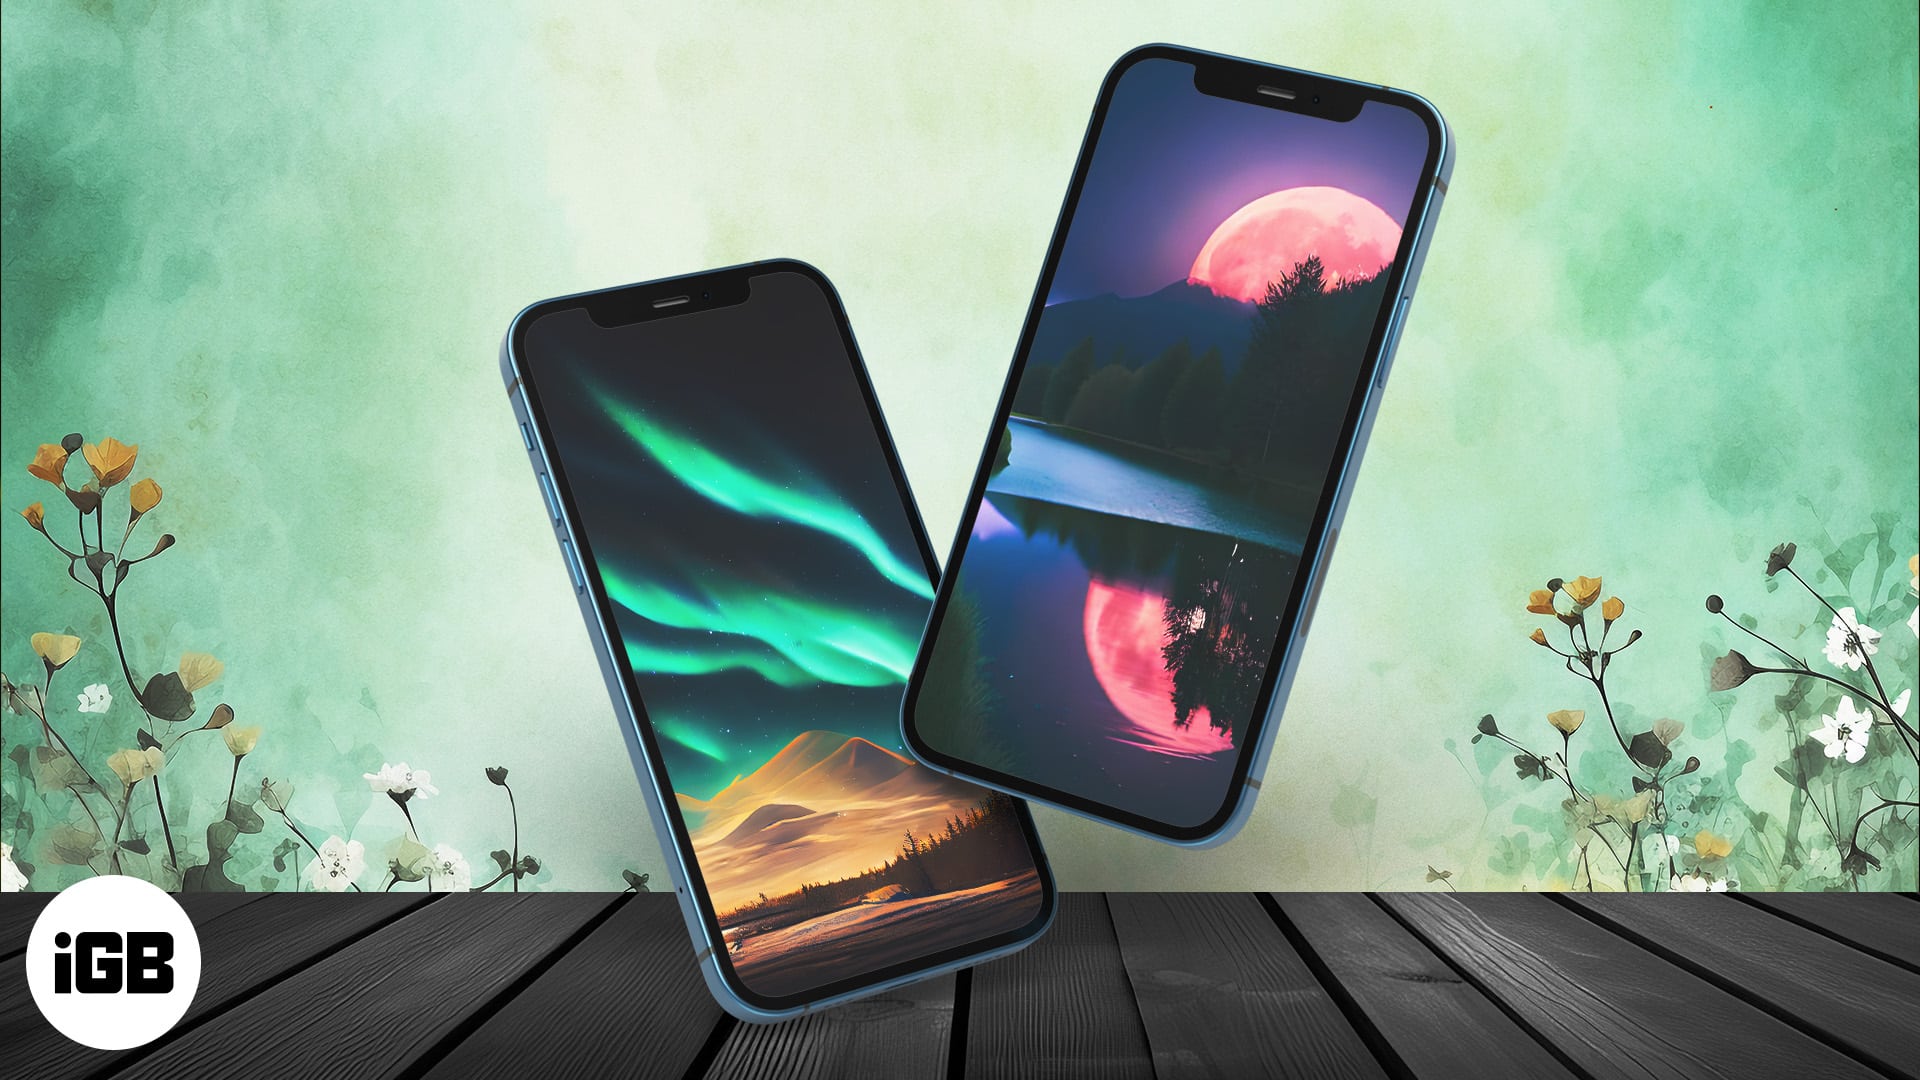 Stunning aesthetic wallpapers for iphone